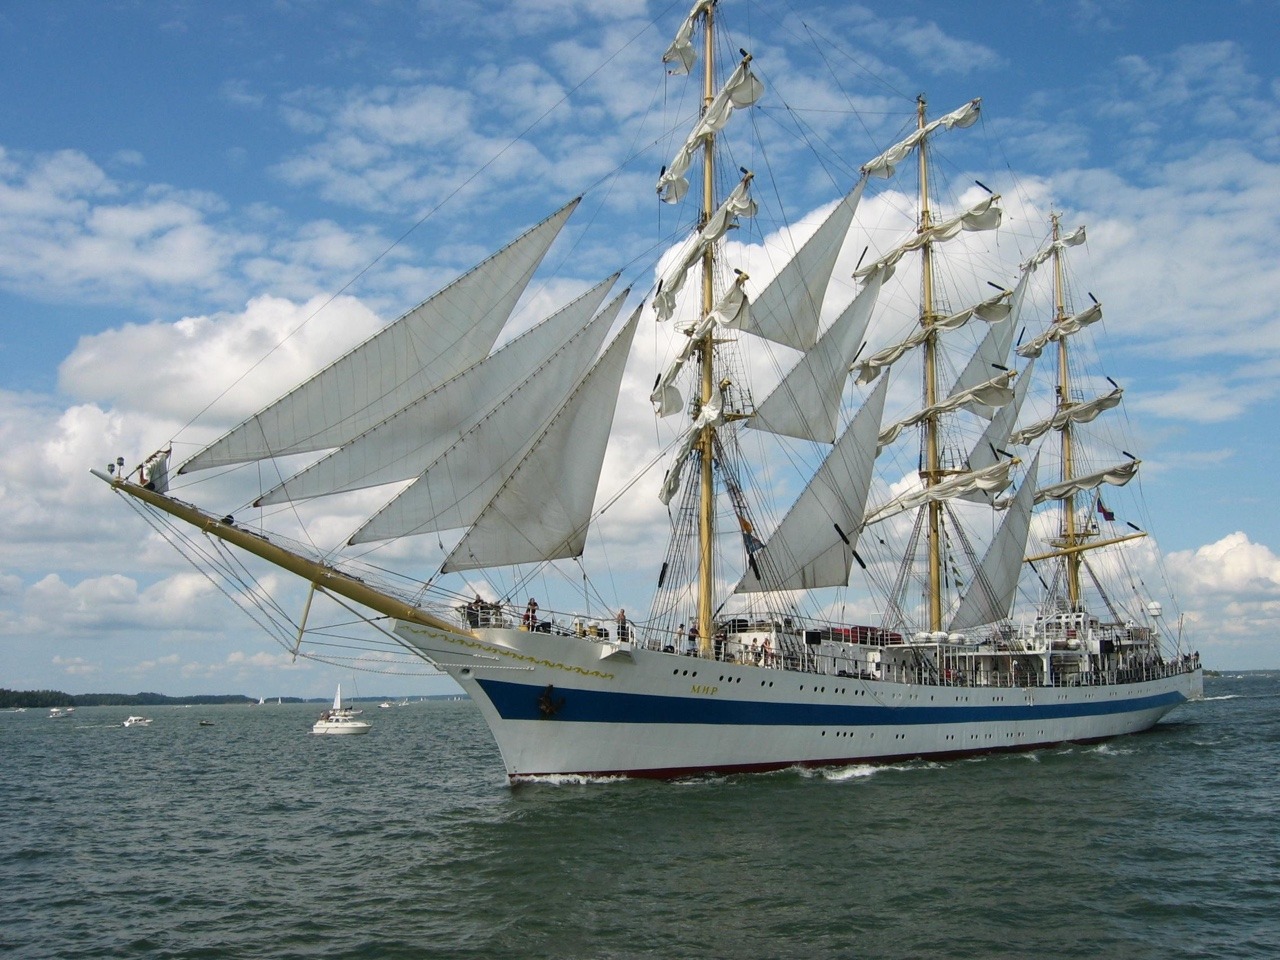 pirates-king:
“Pirates’ King
 STS Mir  Russian: Мир, meaning Peace, is a three-masted, full rigged training ship, based in St. Petersburg, Russia. It was built in 1987 at the Lenin Shipyard in Gdańsk, Poland.
”